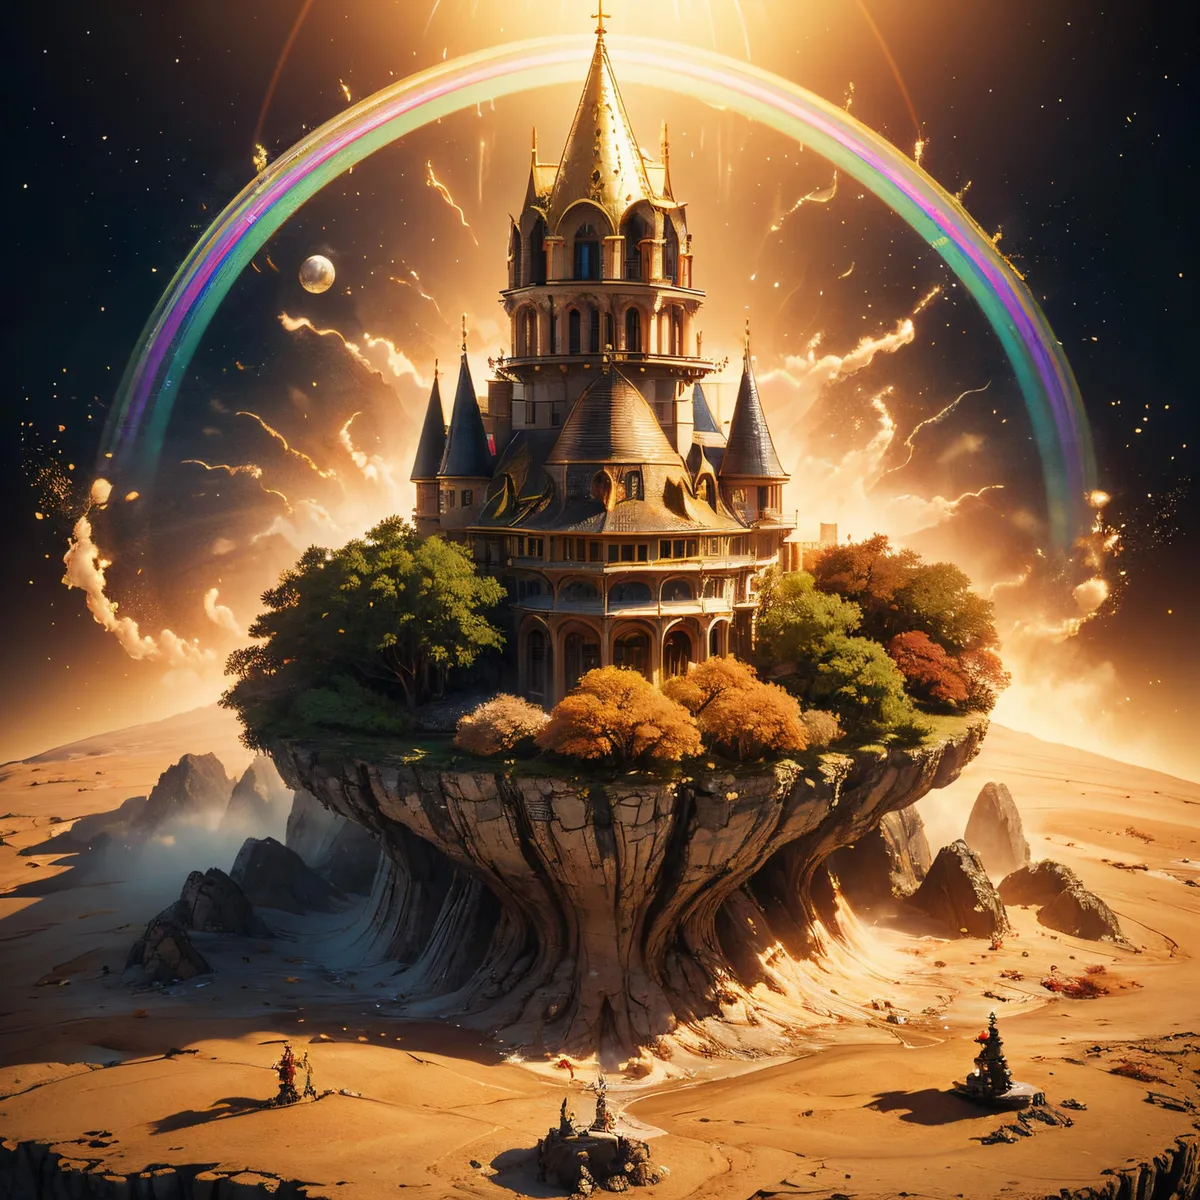 A floating castle with multiple towers on a cliff surrounded by trees and a vivid rainbow in a surreal fantasy landscape generated using Stable Diffusion.